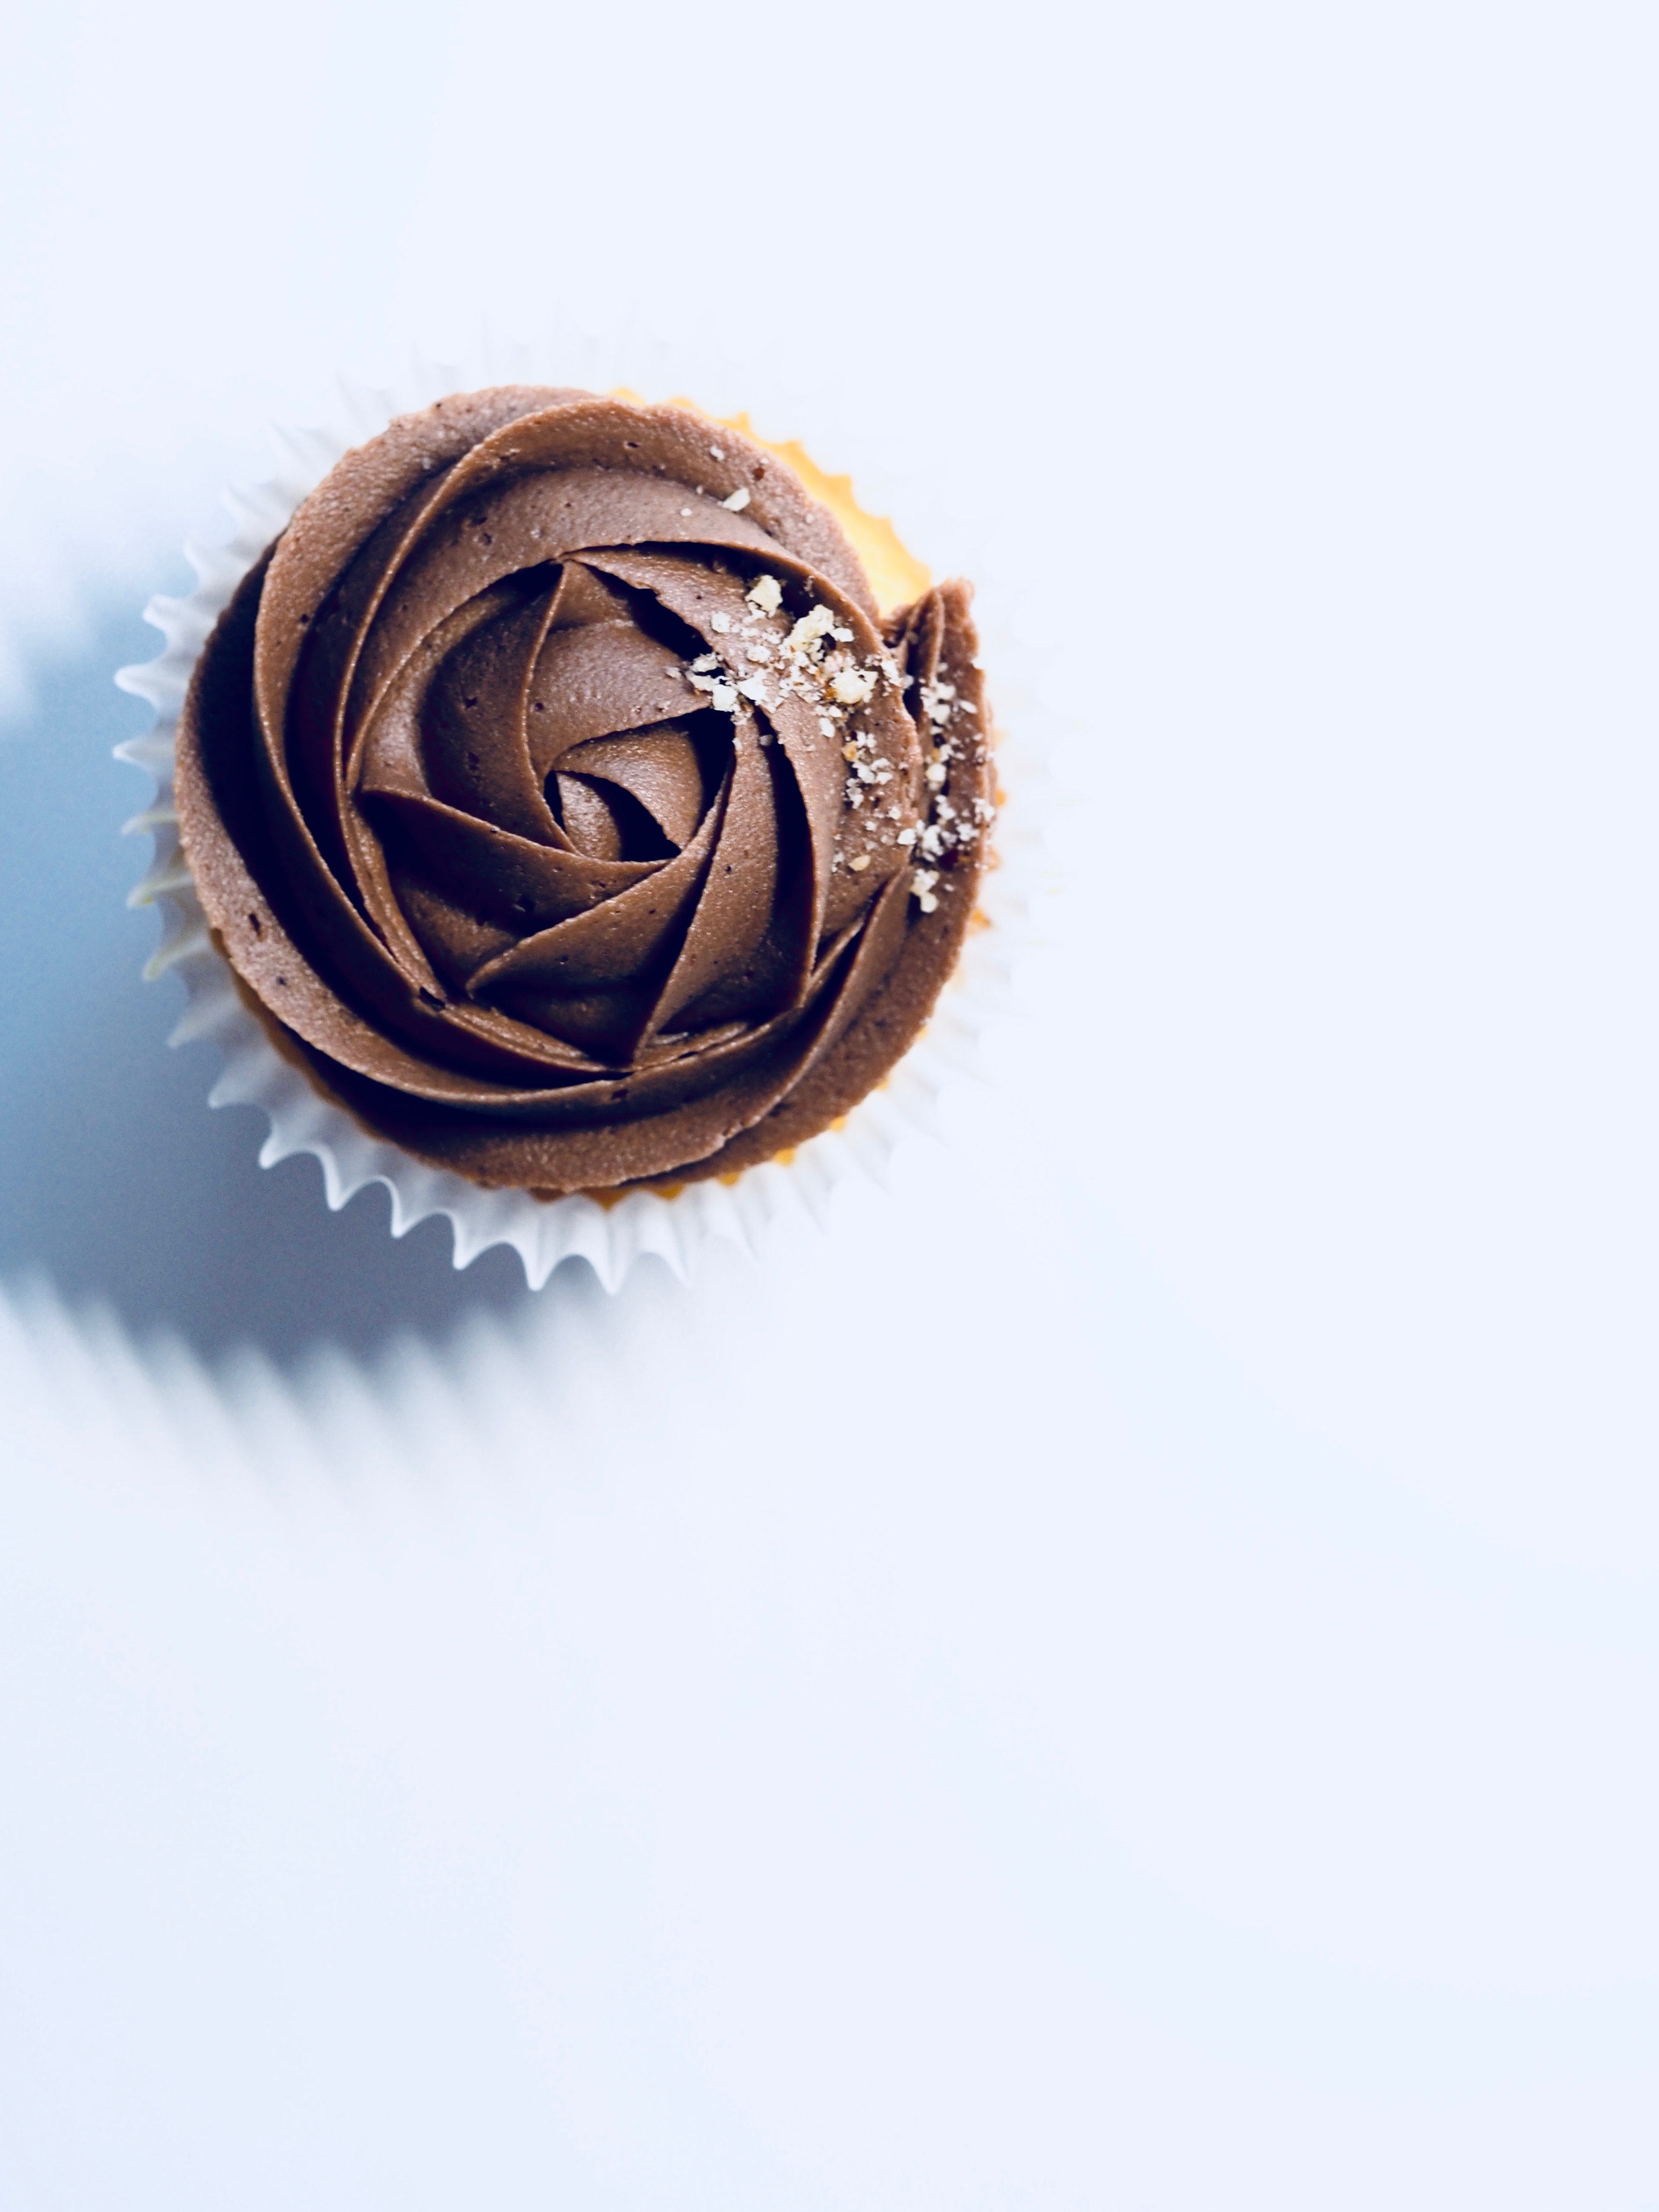 Flat view of a chocolate cupcake on a white surface